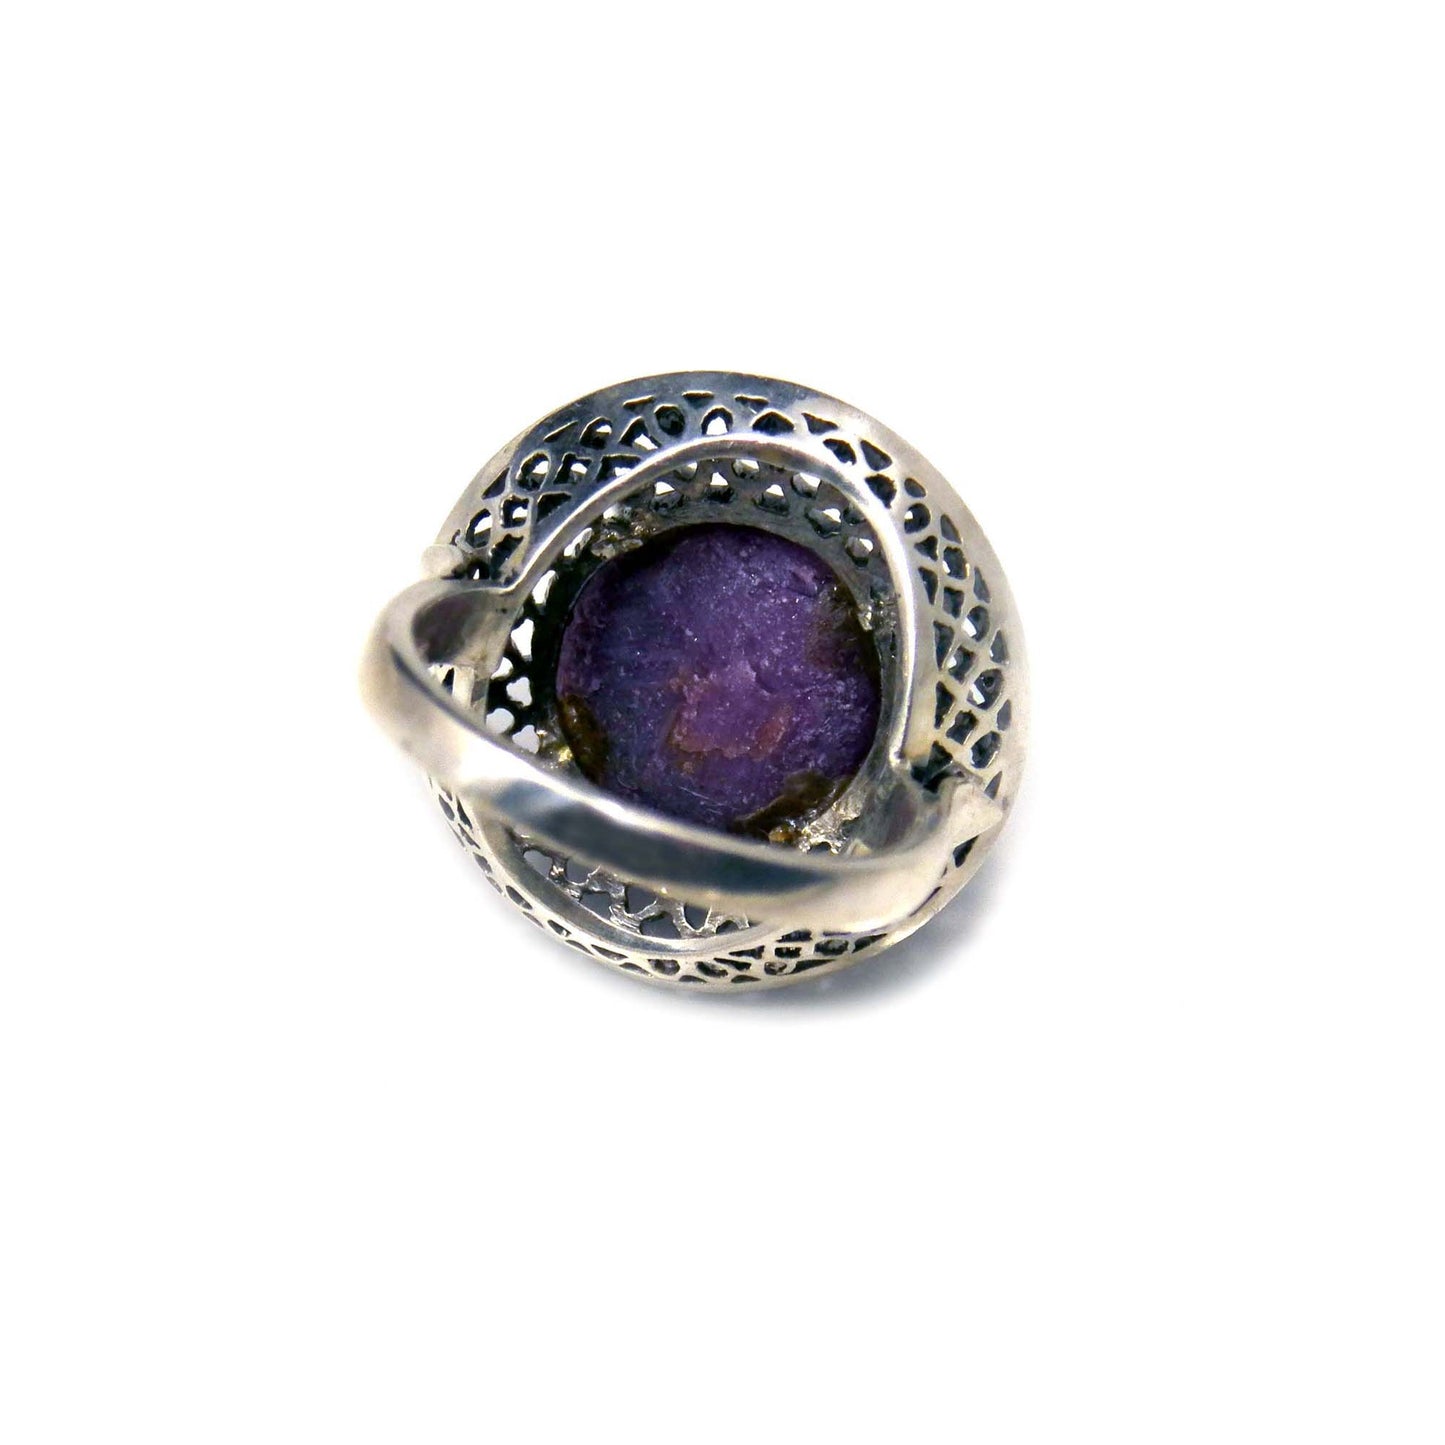 Large Purple Star Sapphire Ring, Sterling Silver Vintage Artisan Jewelry